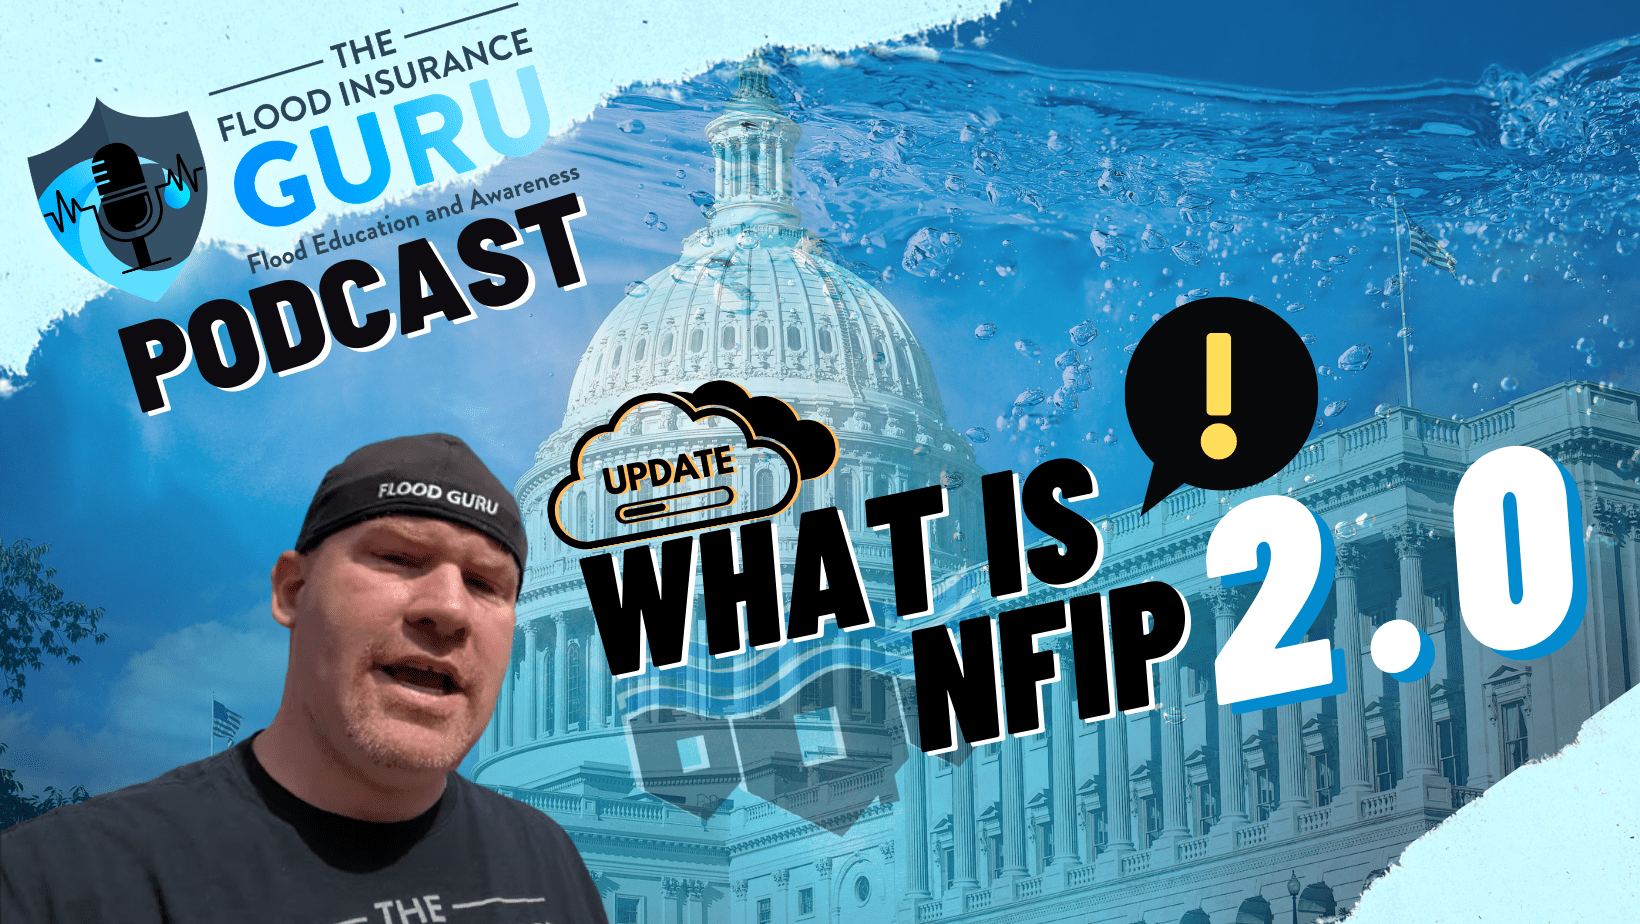 The Flood Insurance Guru | Podcast Episode 6 | What is NFIP 2.0?